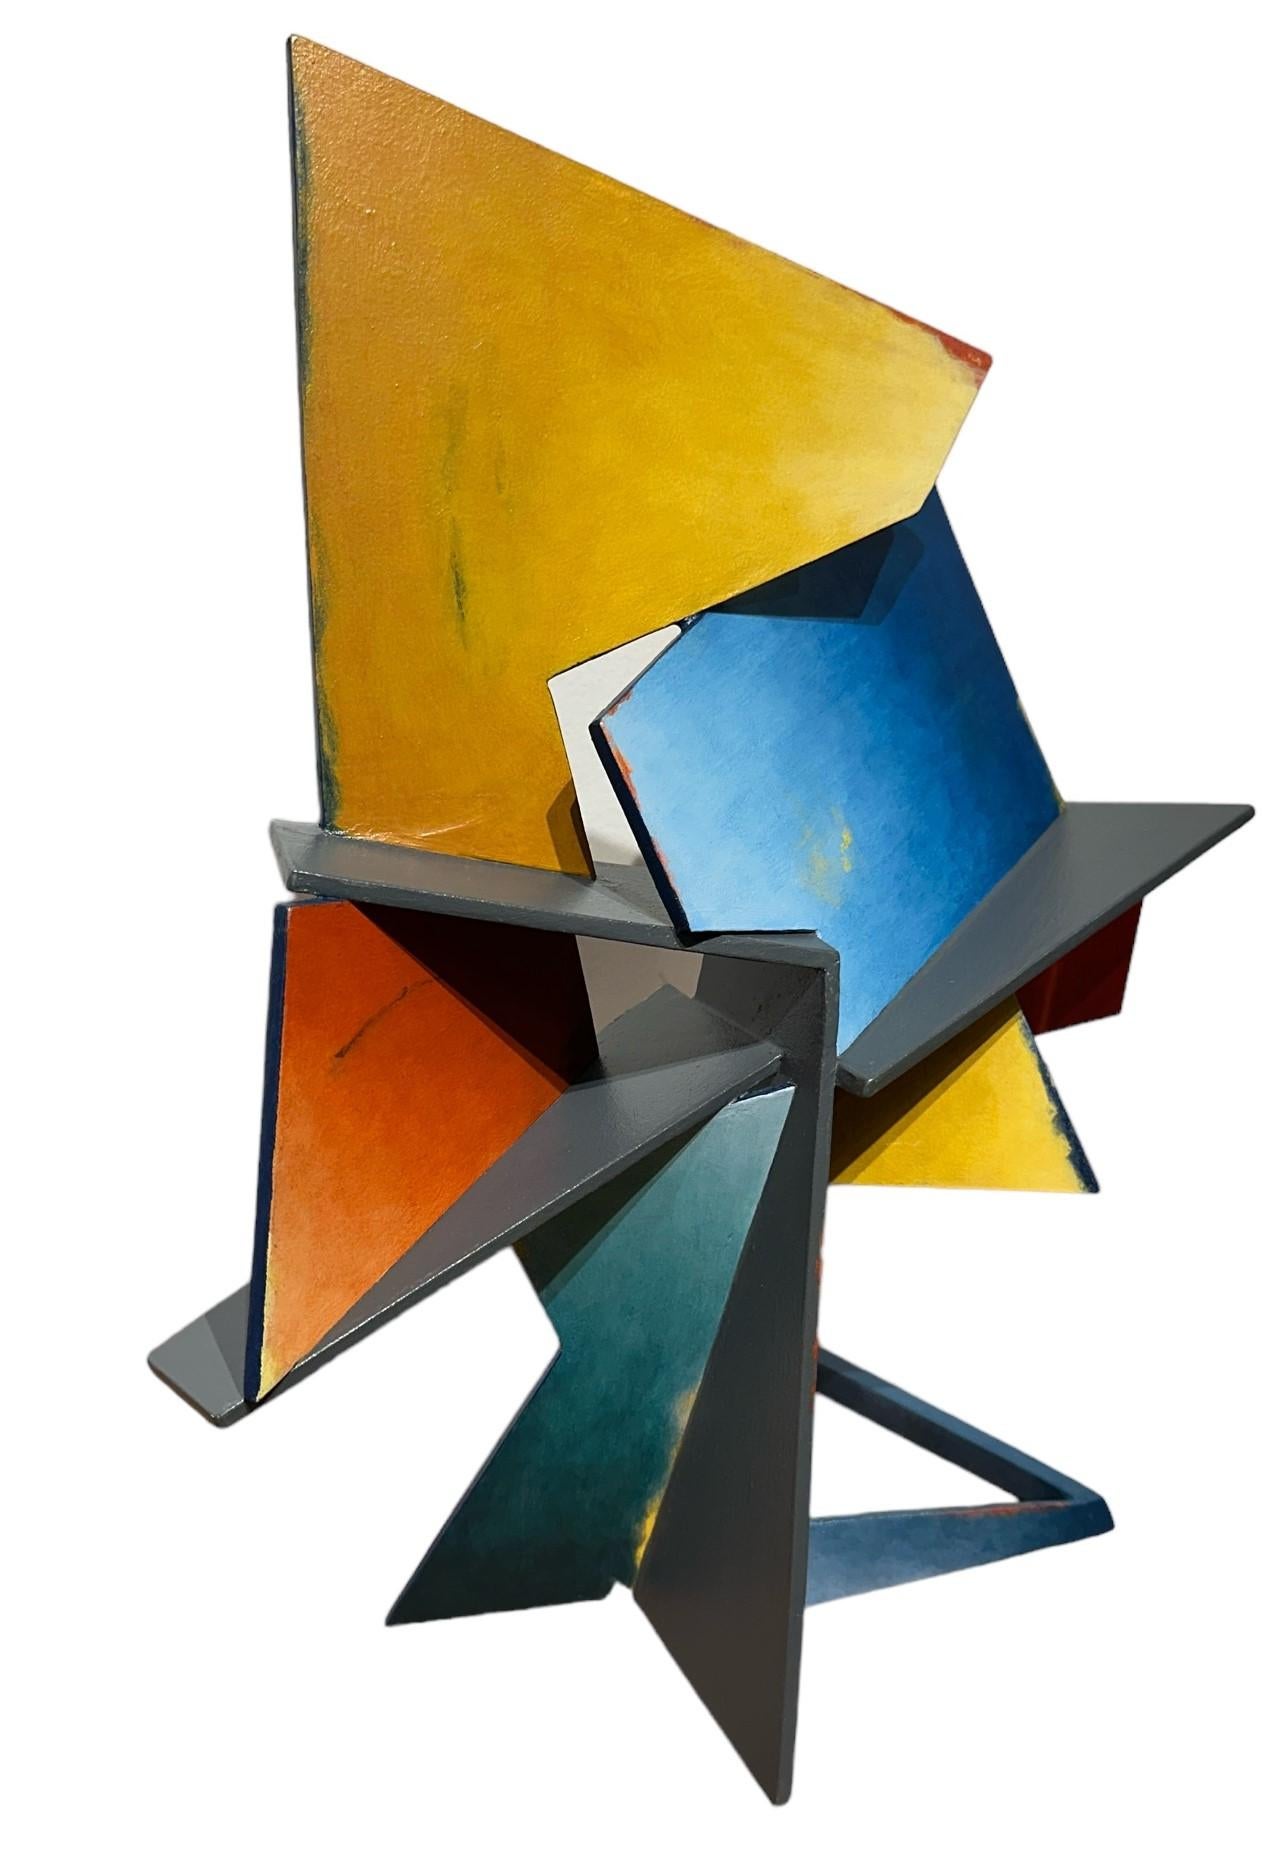 Zia Rising - Geometric Steel Sculpture, Welded Steel, Hand Painted Acrylic For Sale 1